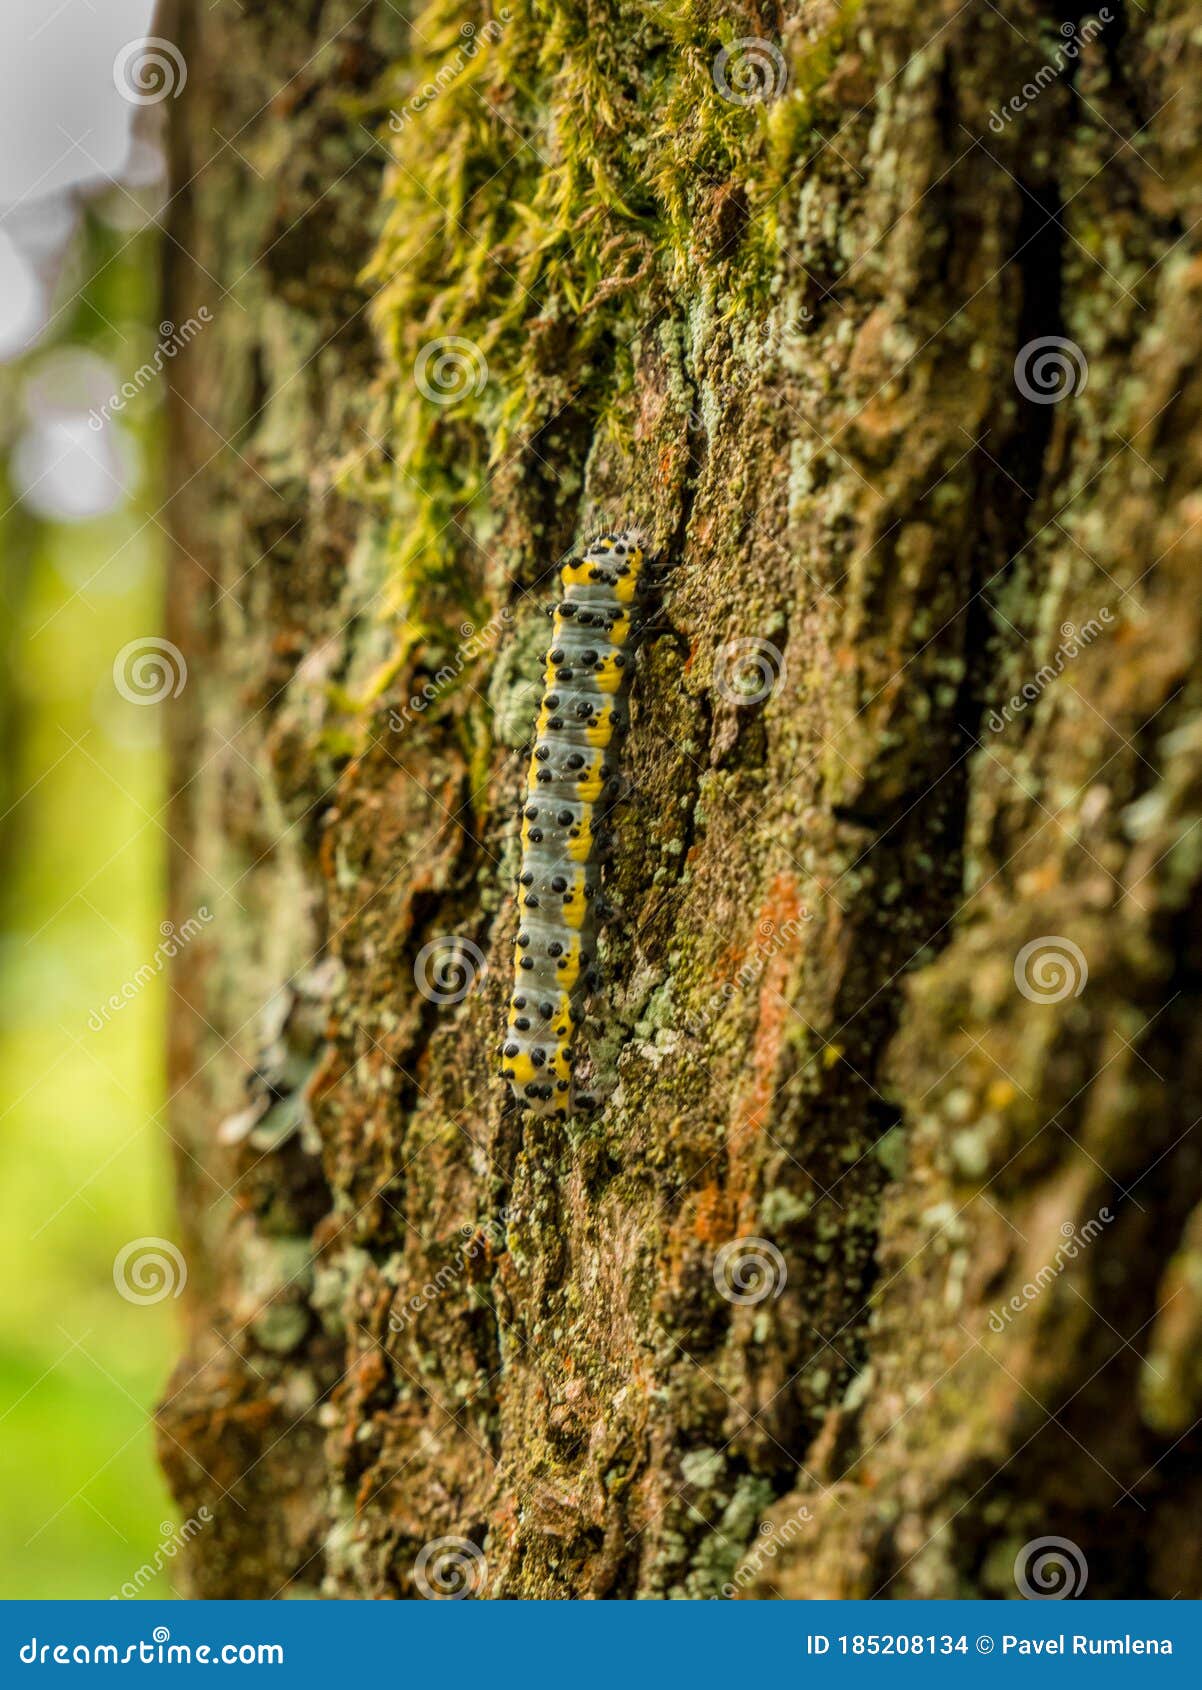 caterpillar with black dots and yellow stripes. toadflax/brocade moth calophasia lunula